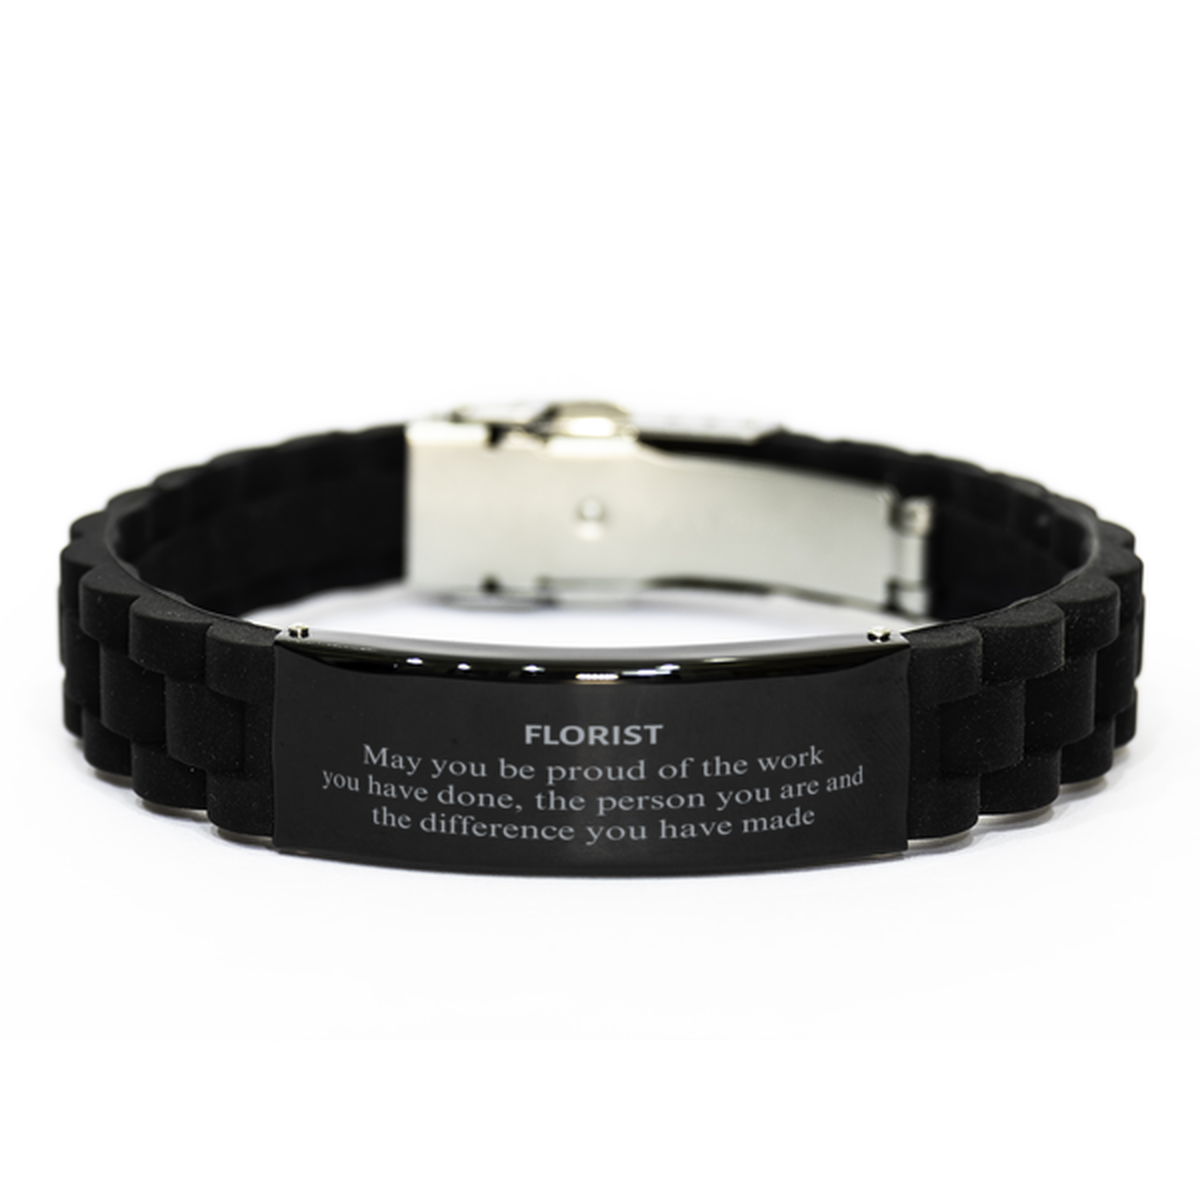 Florist May you be proud of the work you have done, Retirement Florist Black Glidelock Clasp Bracelet for Colleague Appreciation Gifts Amazing for Florist